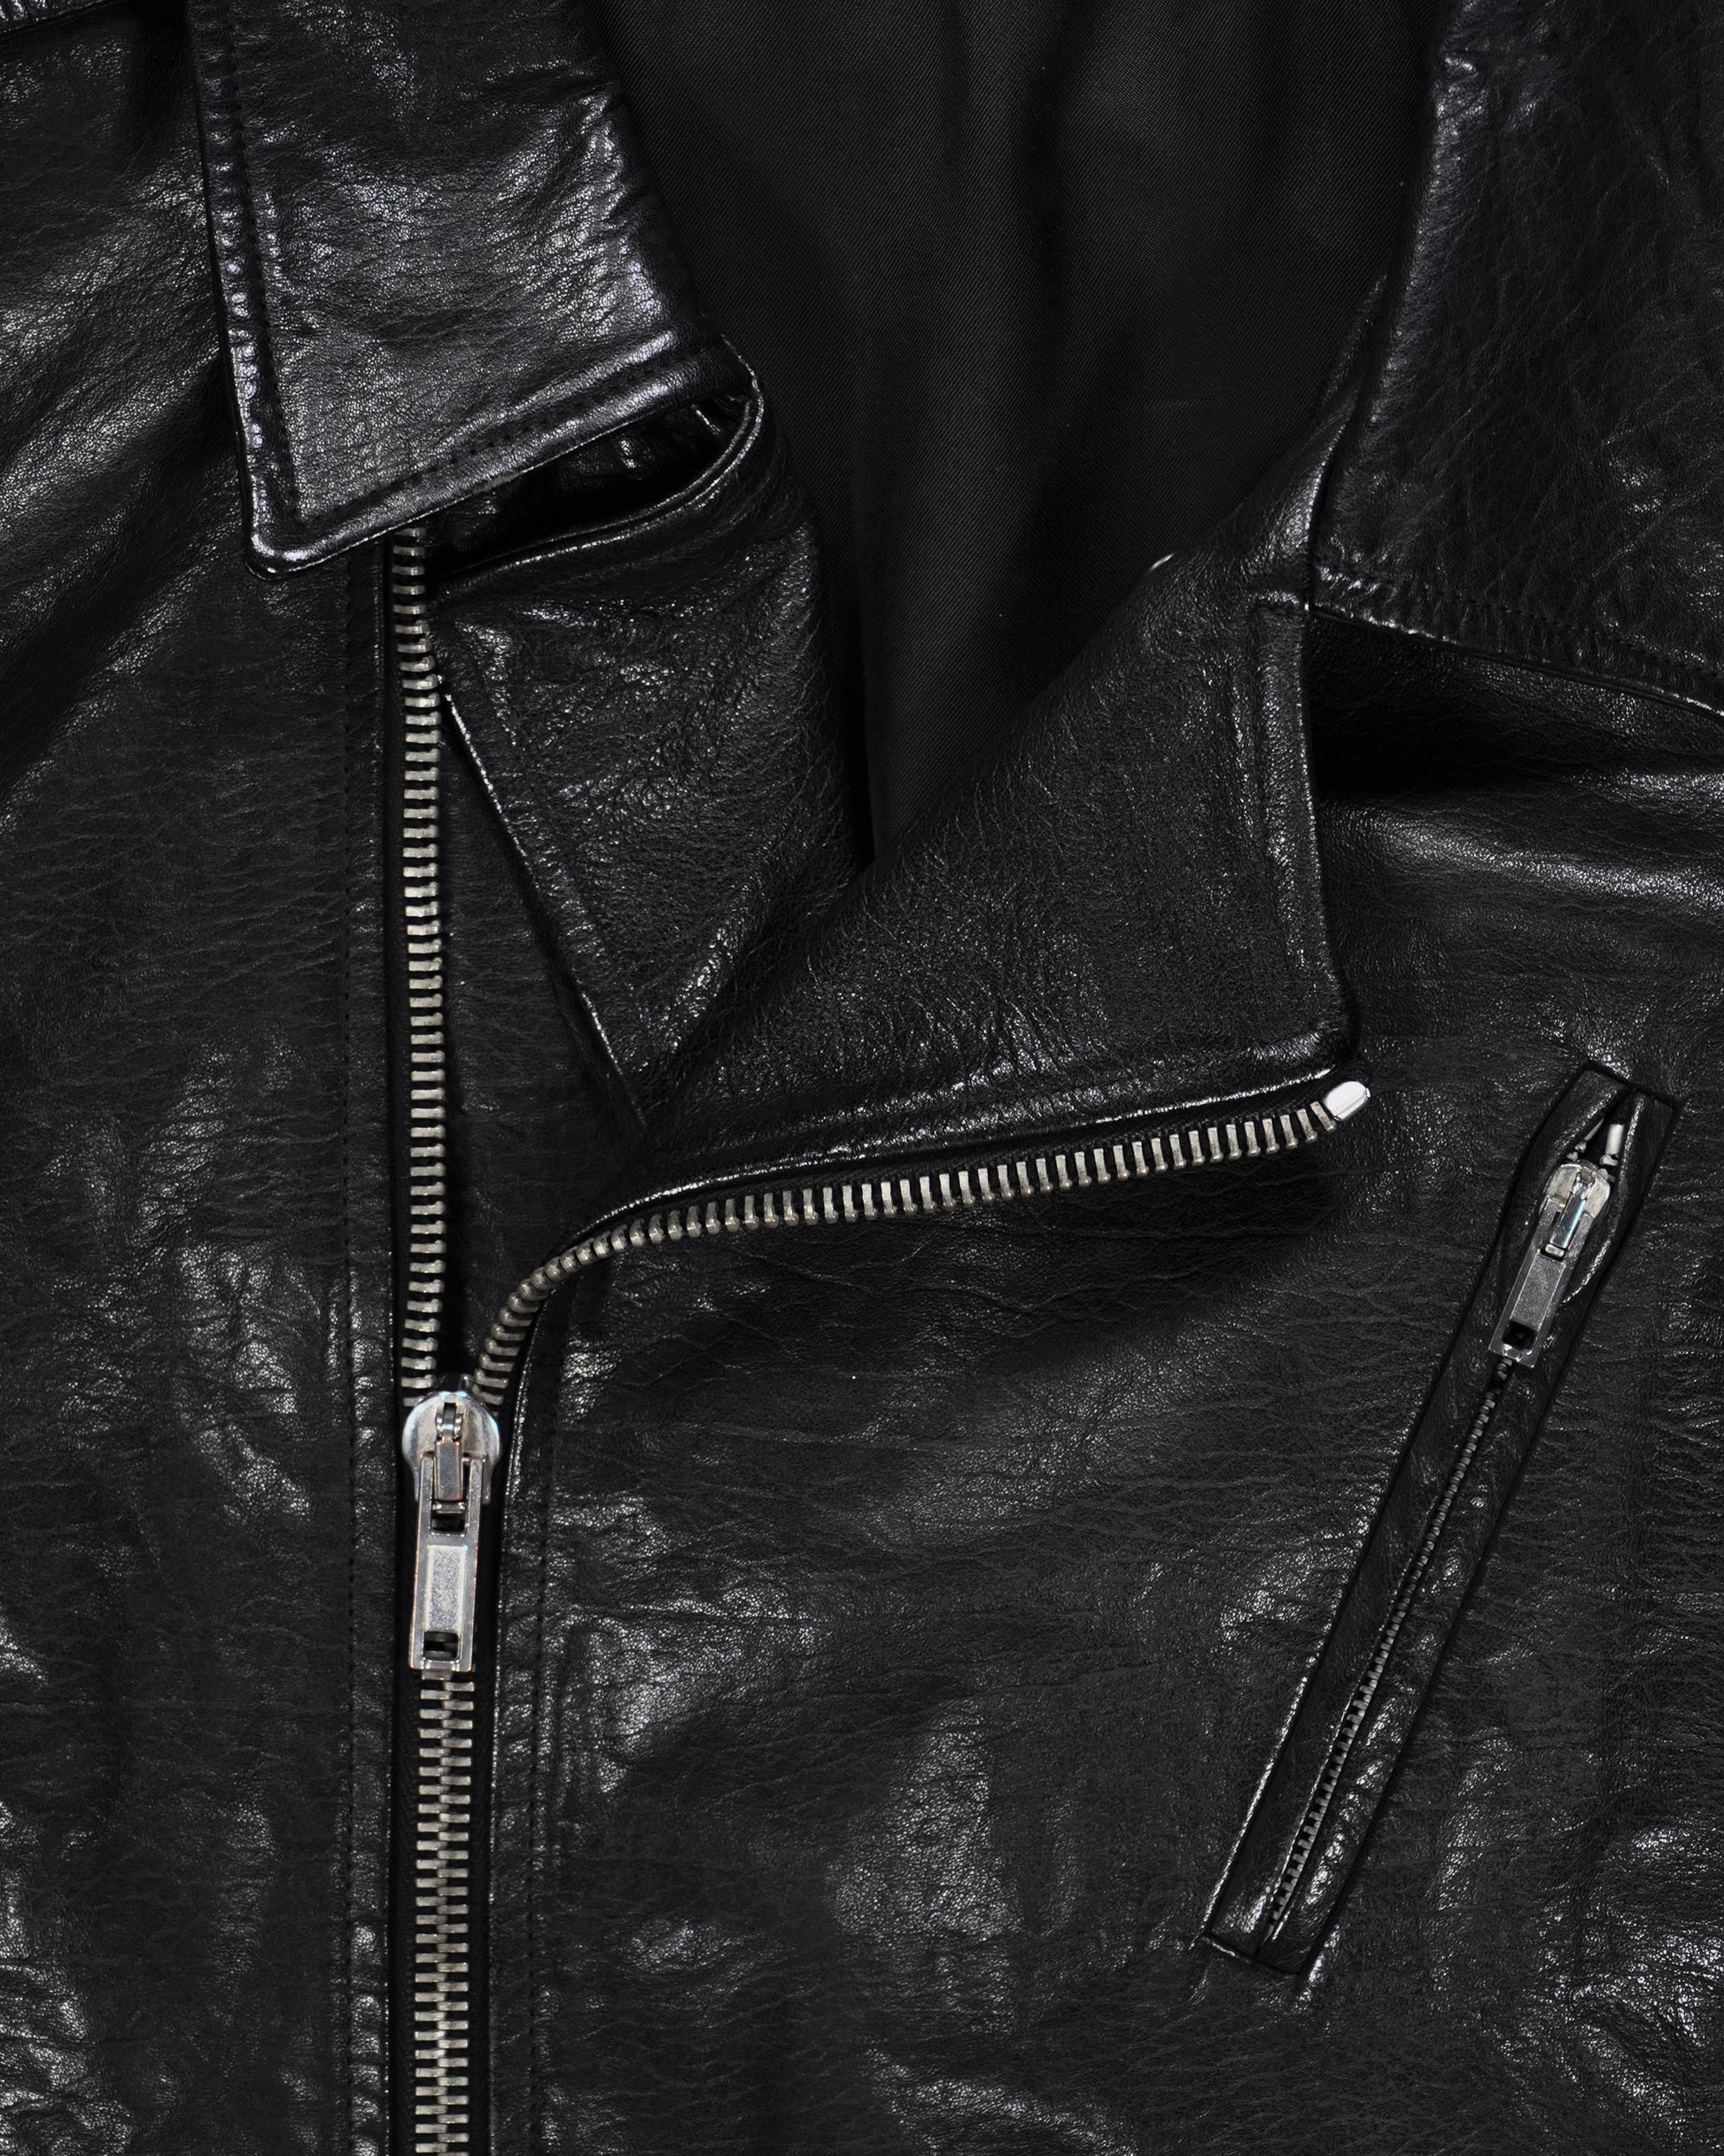 Rick Owens "Stooges" Leather Jacket - SS10 "Release"